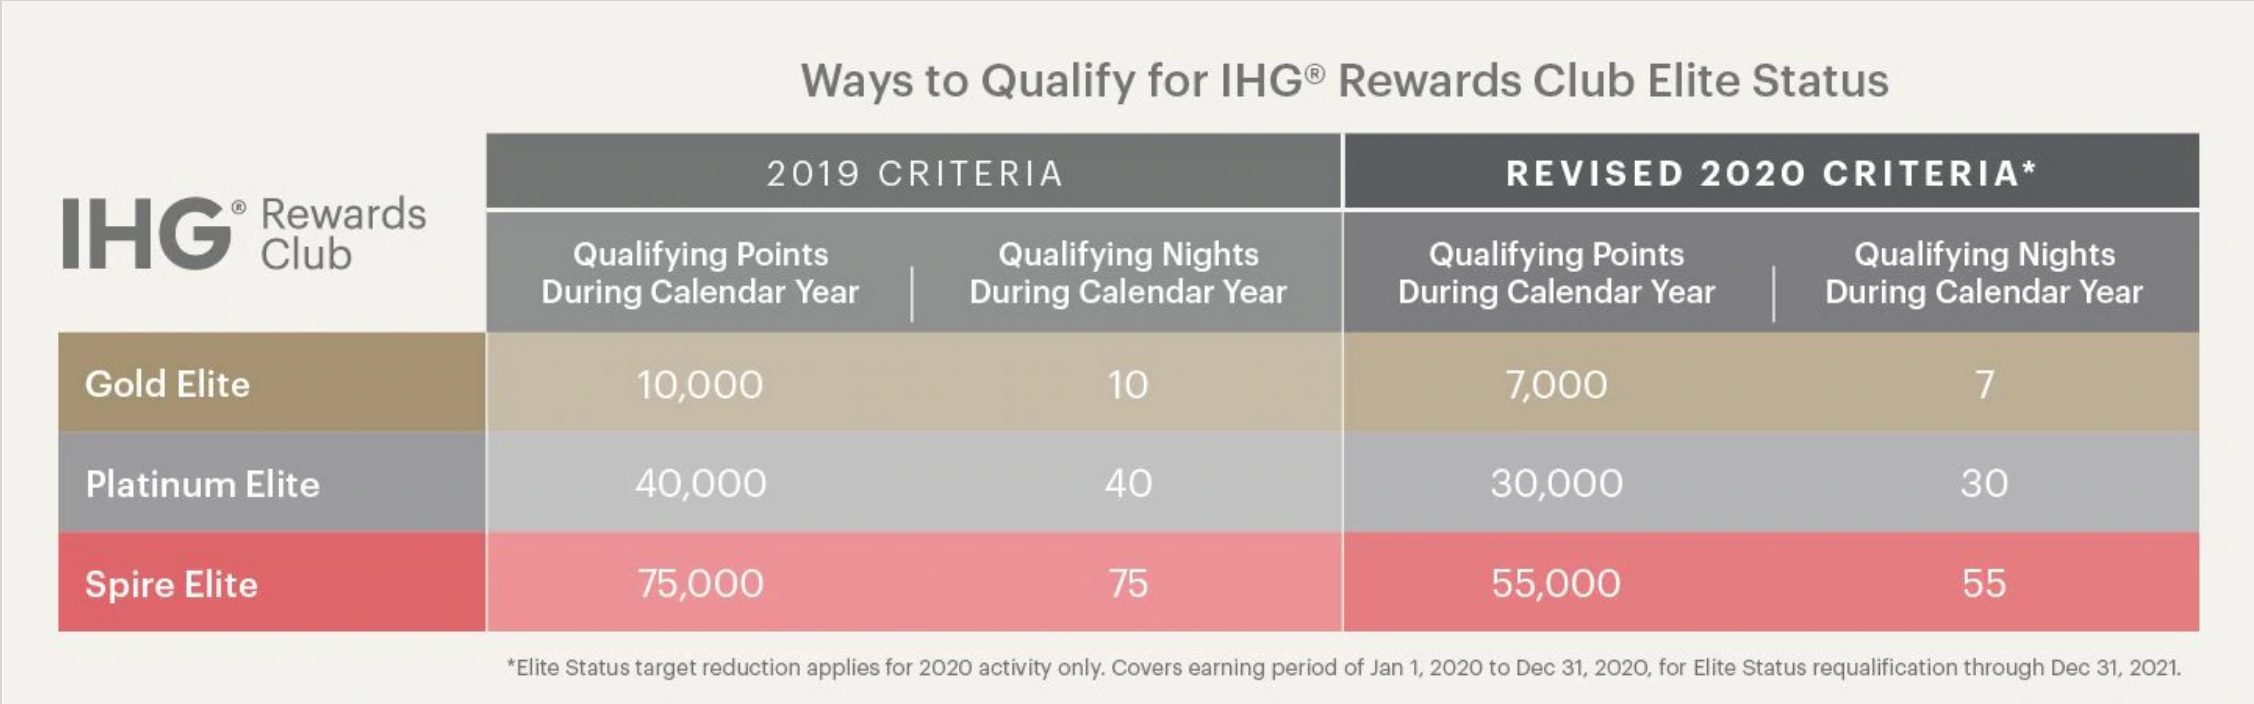 IHG Rewards Club Extends Status and Points For Everyone; Flexible  Reservation Policy Updates: 2019 Novel Coronavirus Pandemic - The Gate